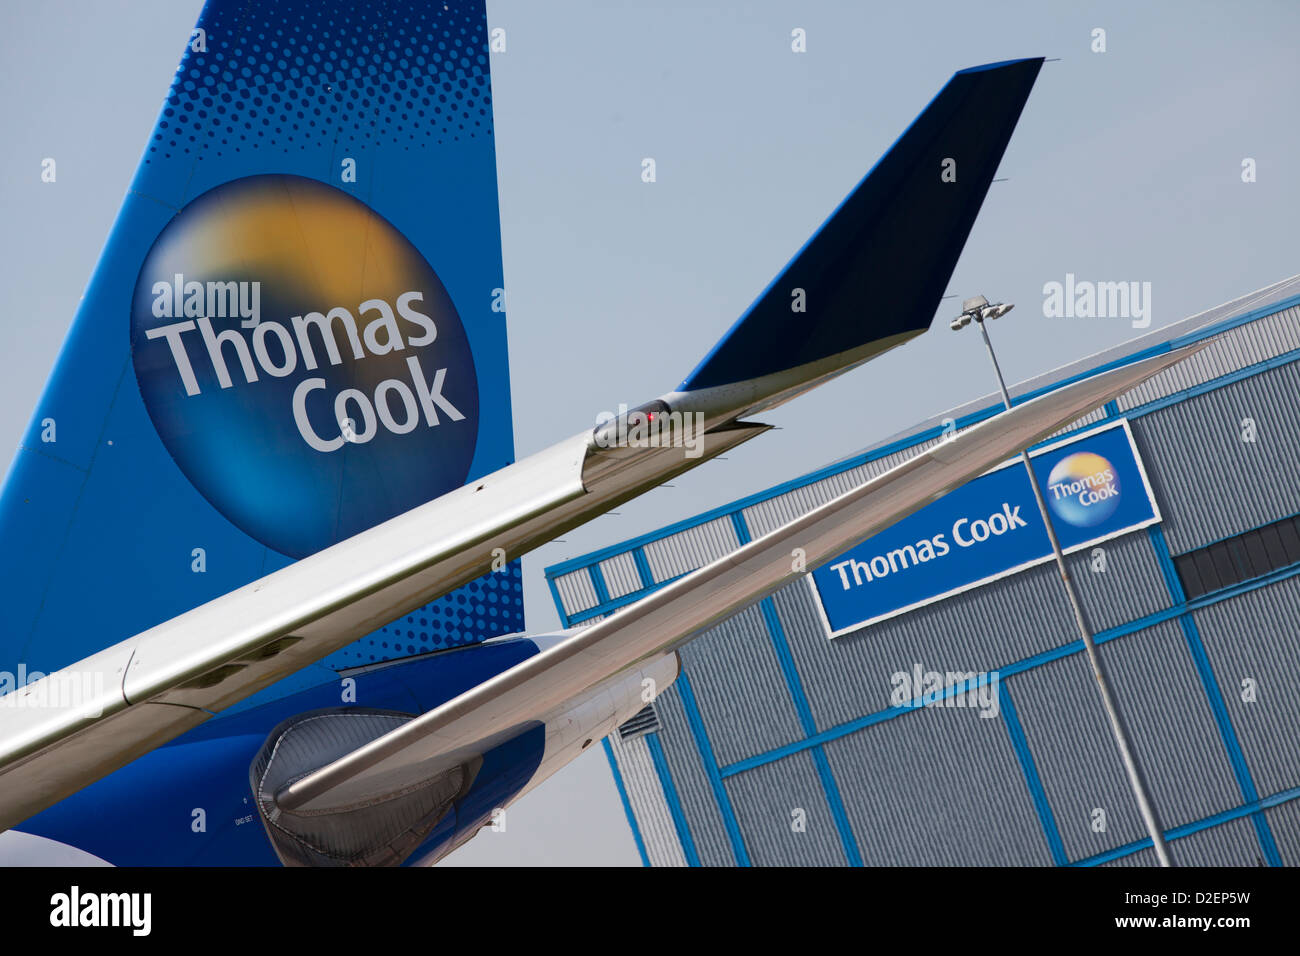 Airbus A330 Thomas Cook plane passing the Thomas Cook hanger at Manchester Airport Stock Photo